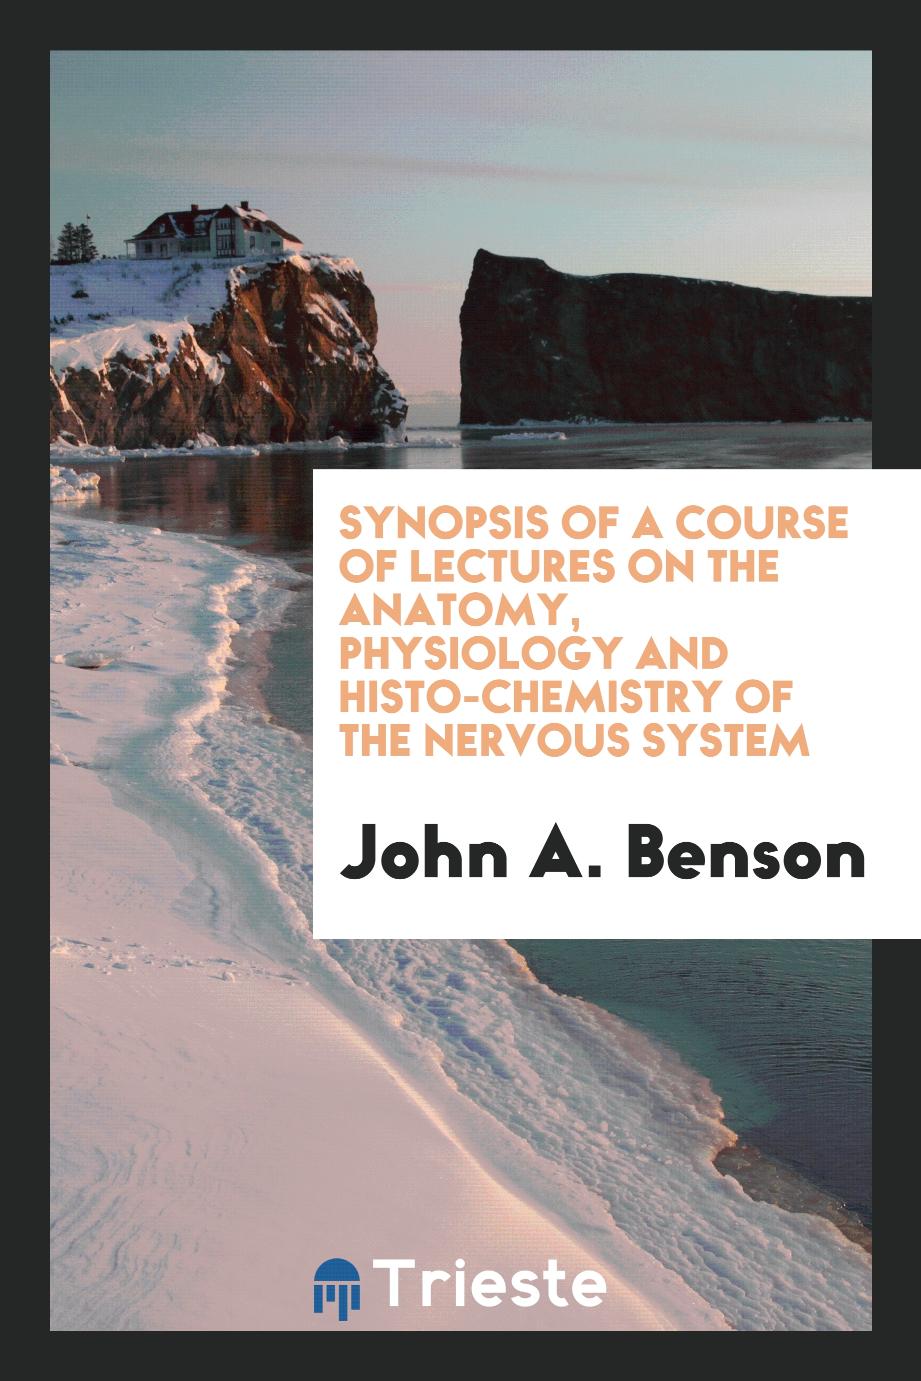 Synopsis of a course of lectures on the anatomy, physiology and histo-chemistry of the nervous system